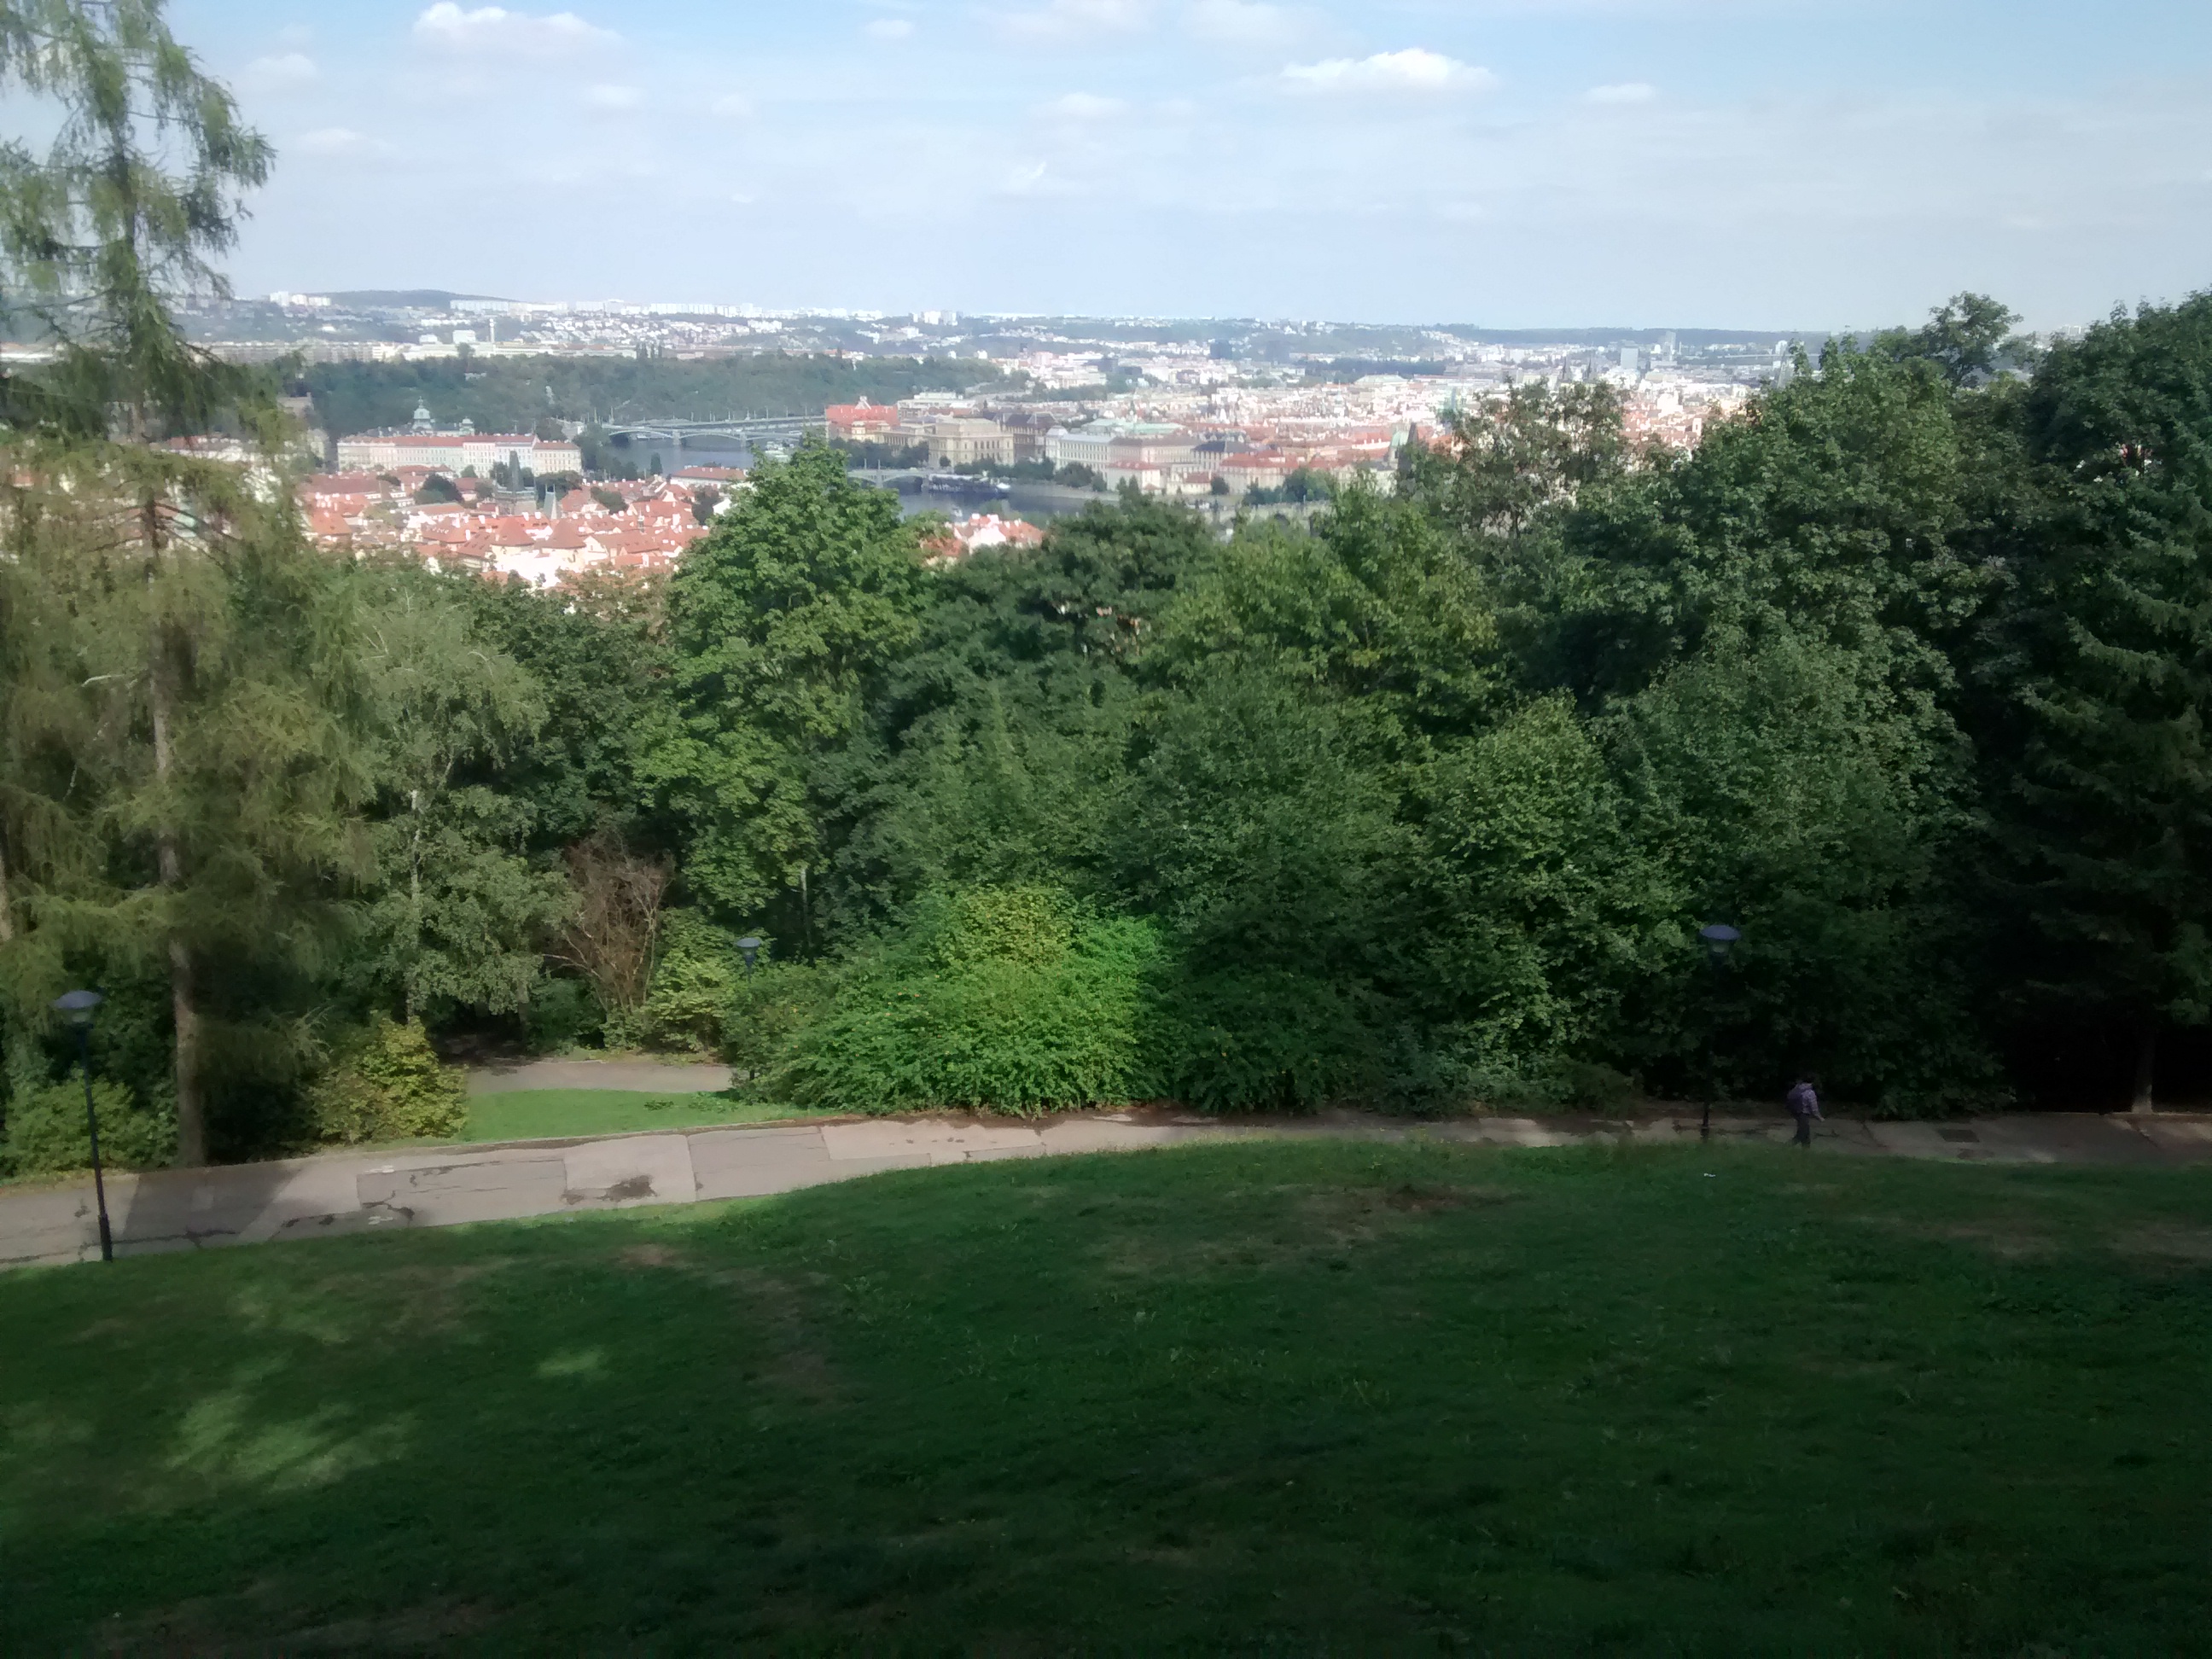 View of Prague with some trees in the way.